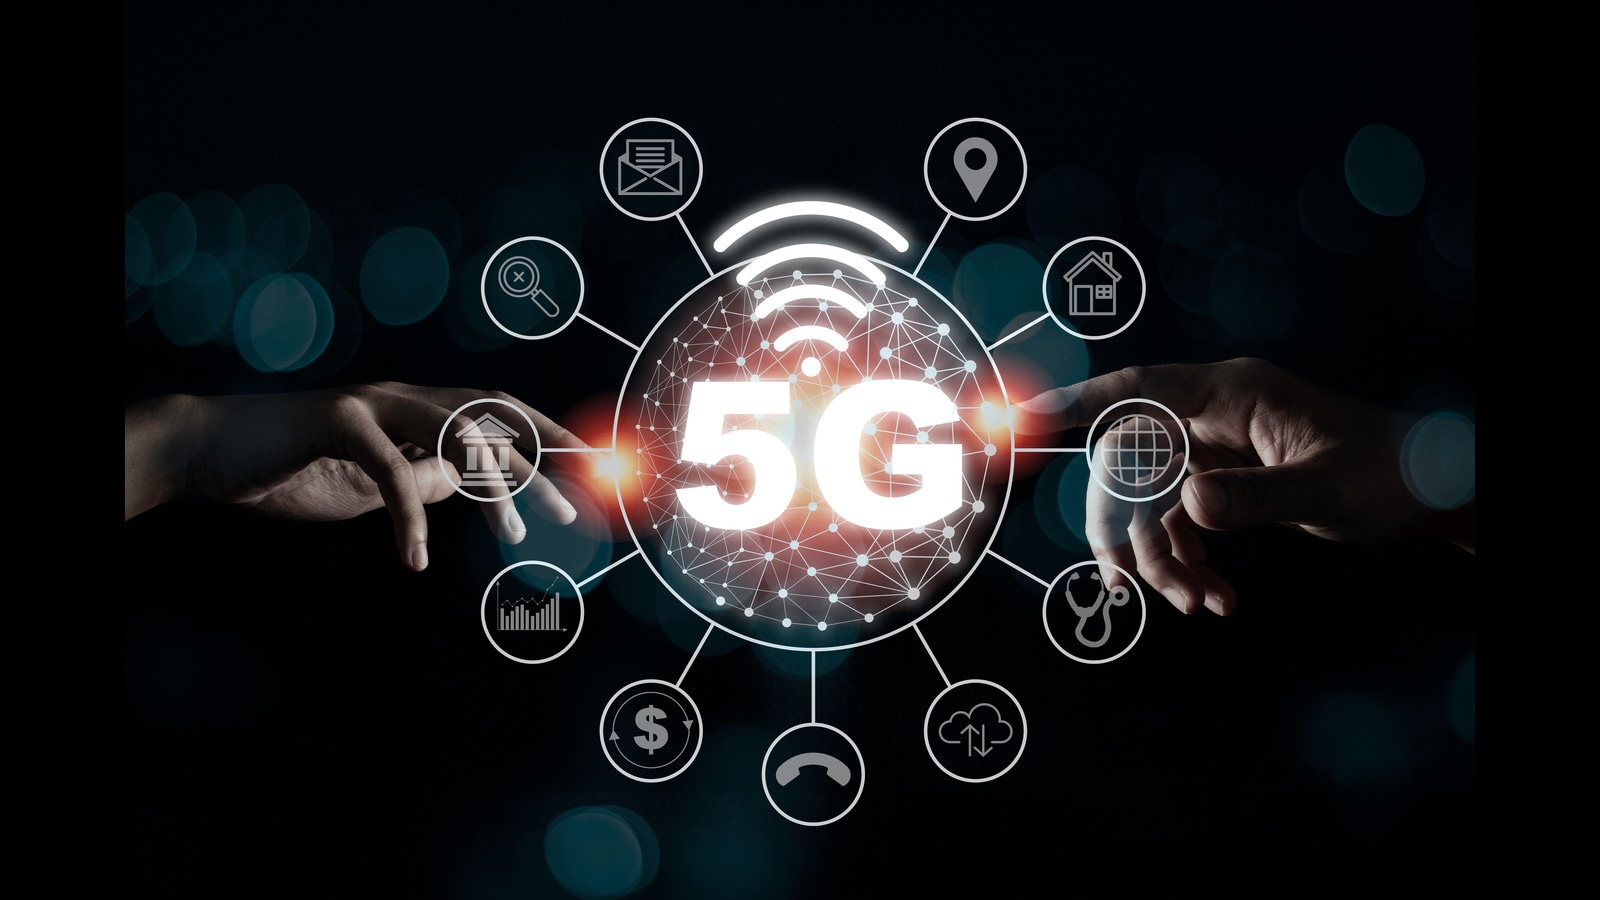 Is India’s IT workforce ready for embracing new age 5G technology?